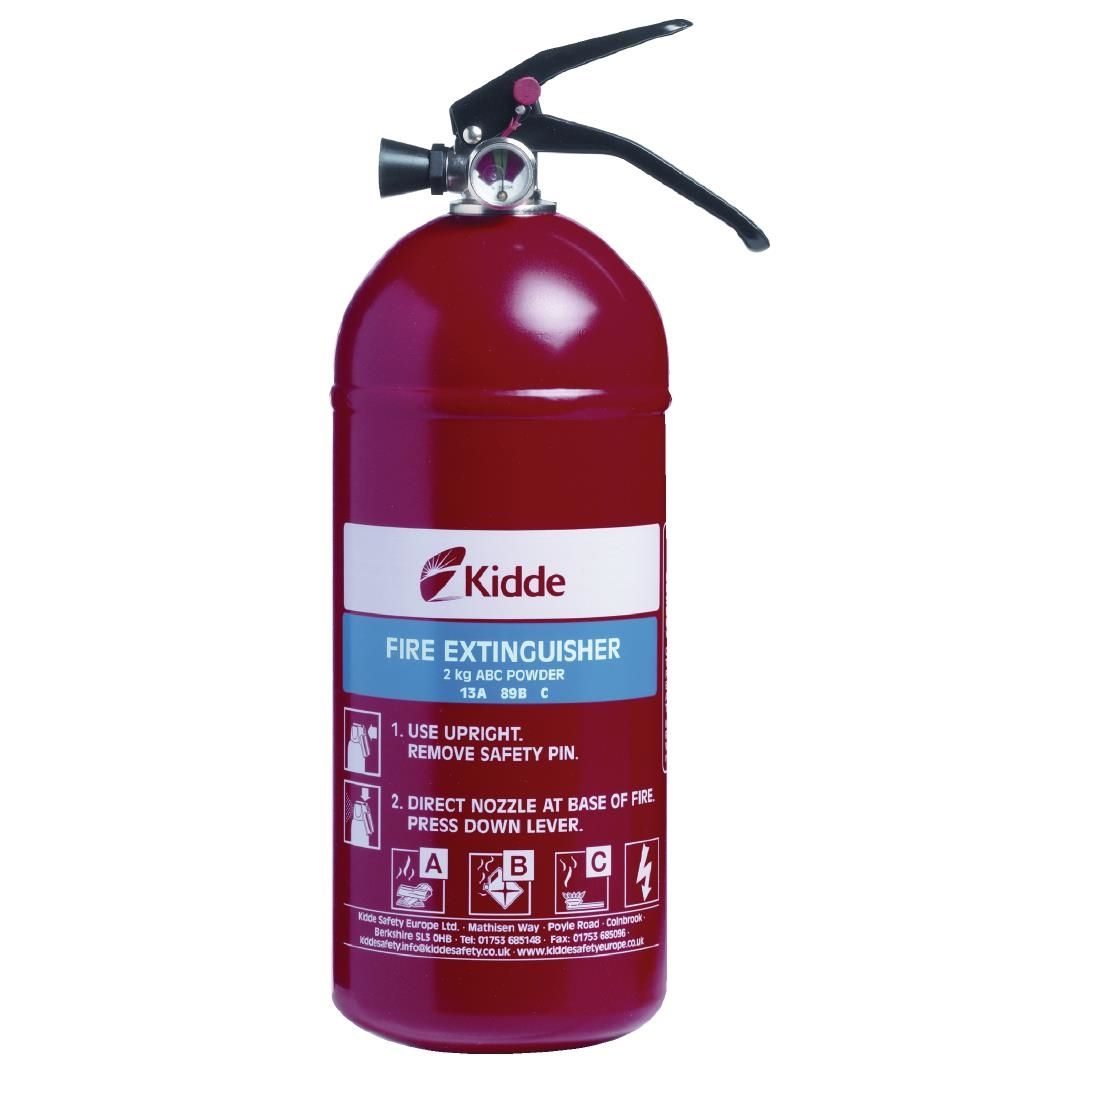 Kidde Fire Extinguisher - Multi Purpose (A,B, C and electrical fires) JD Catering Equipment Solutions Ltd